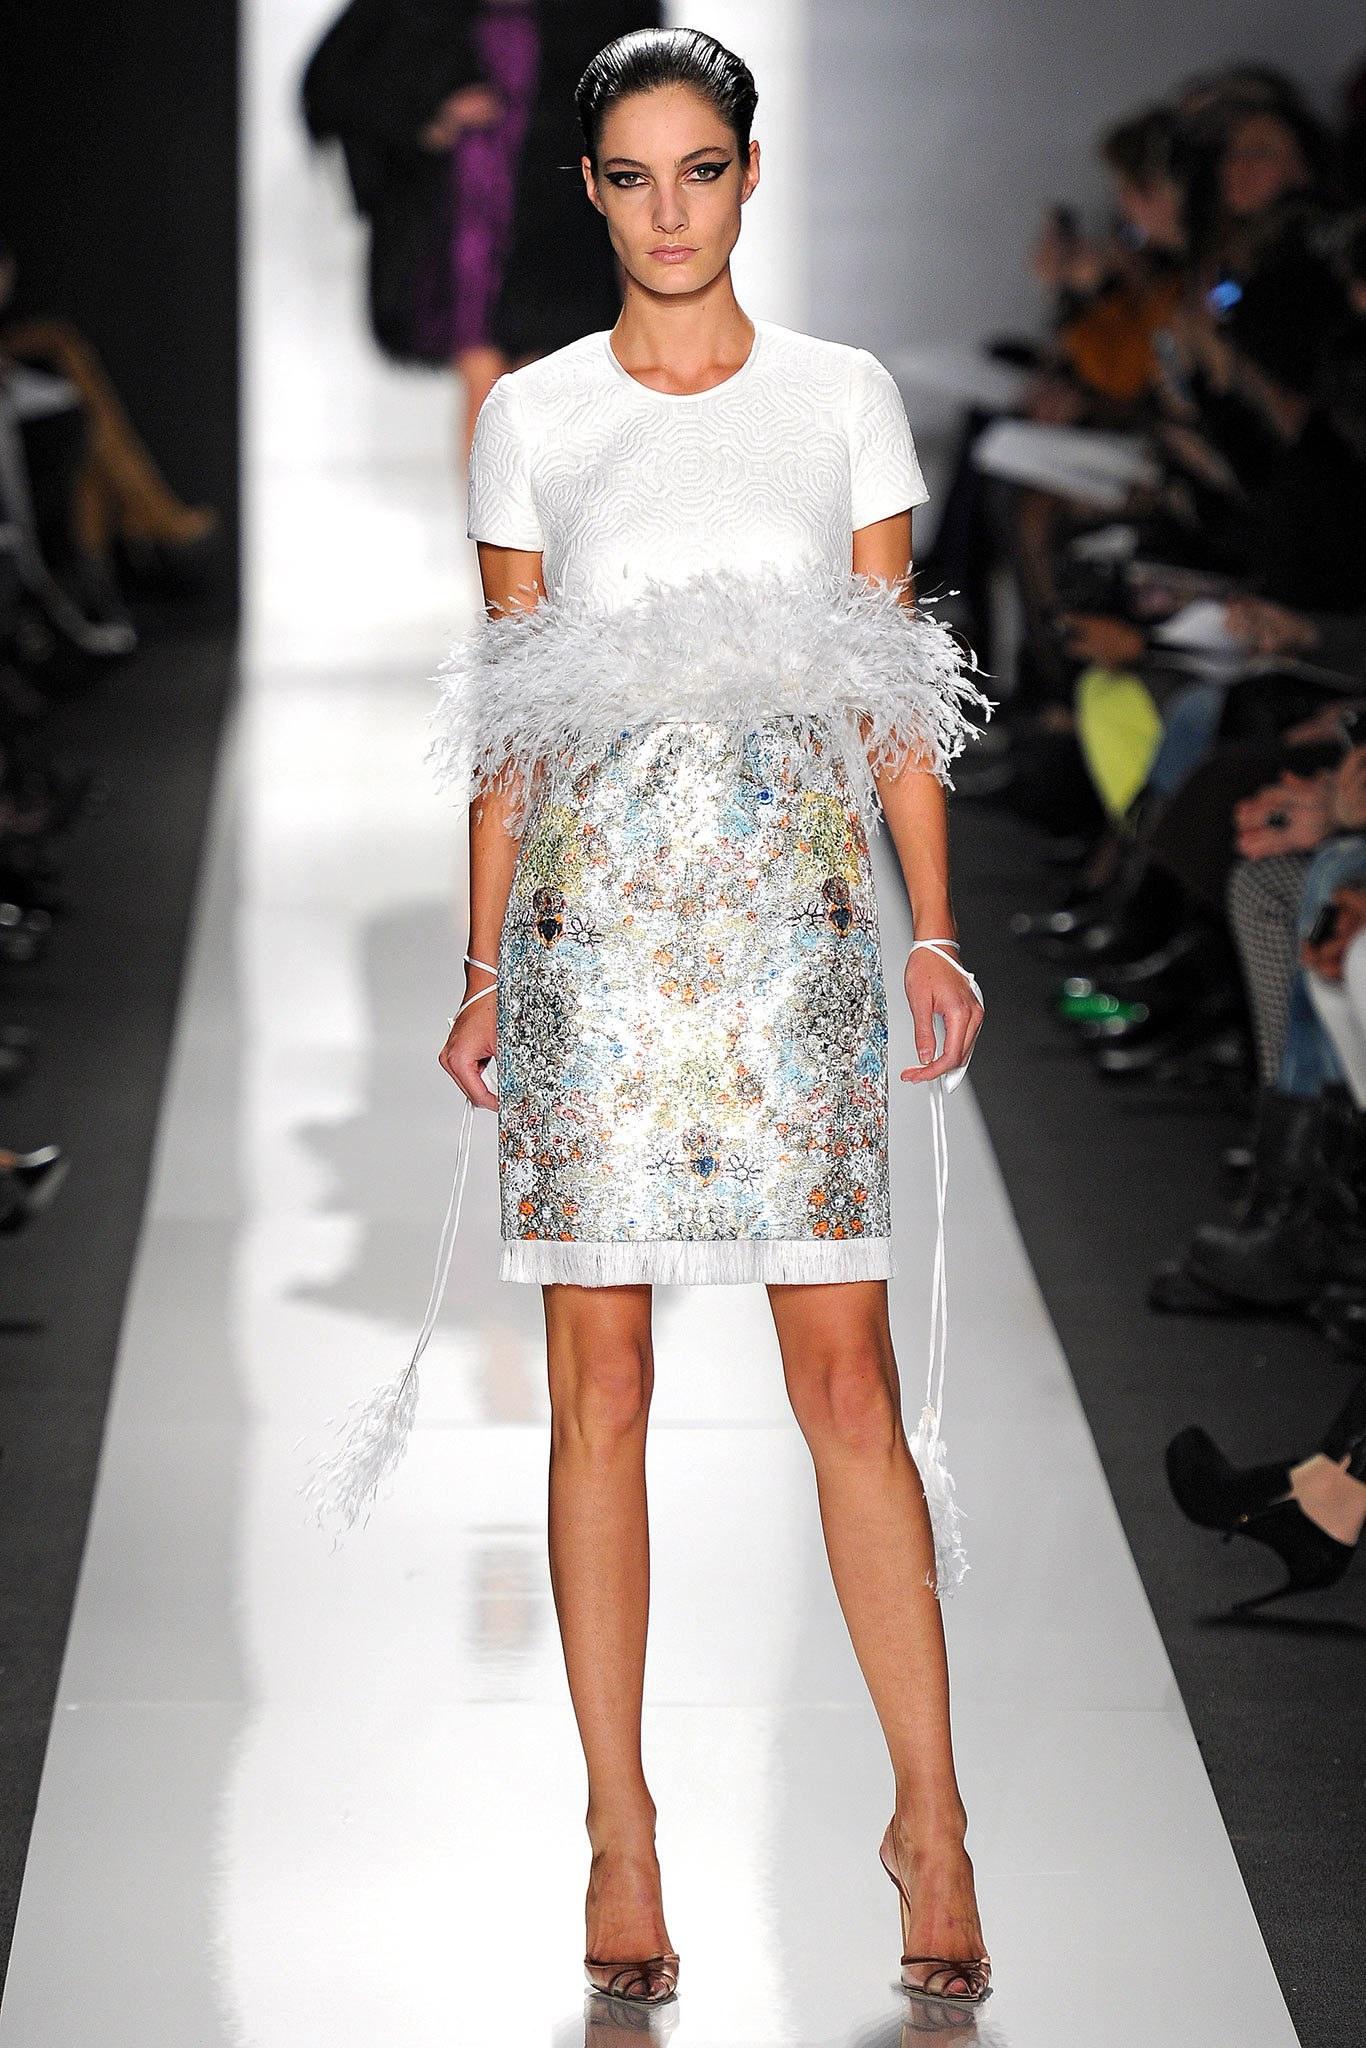 Ralph Rucci  cocktail dress features a quilted cream short sleeve top with chiffon crewneck and button up back, dramatic white feather belt panel, and sequin printed pencil skirt with fringe hem. Made in USA.  Fall 2013.  Retail Price: $10,000
 
New